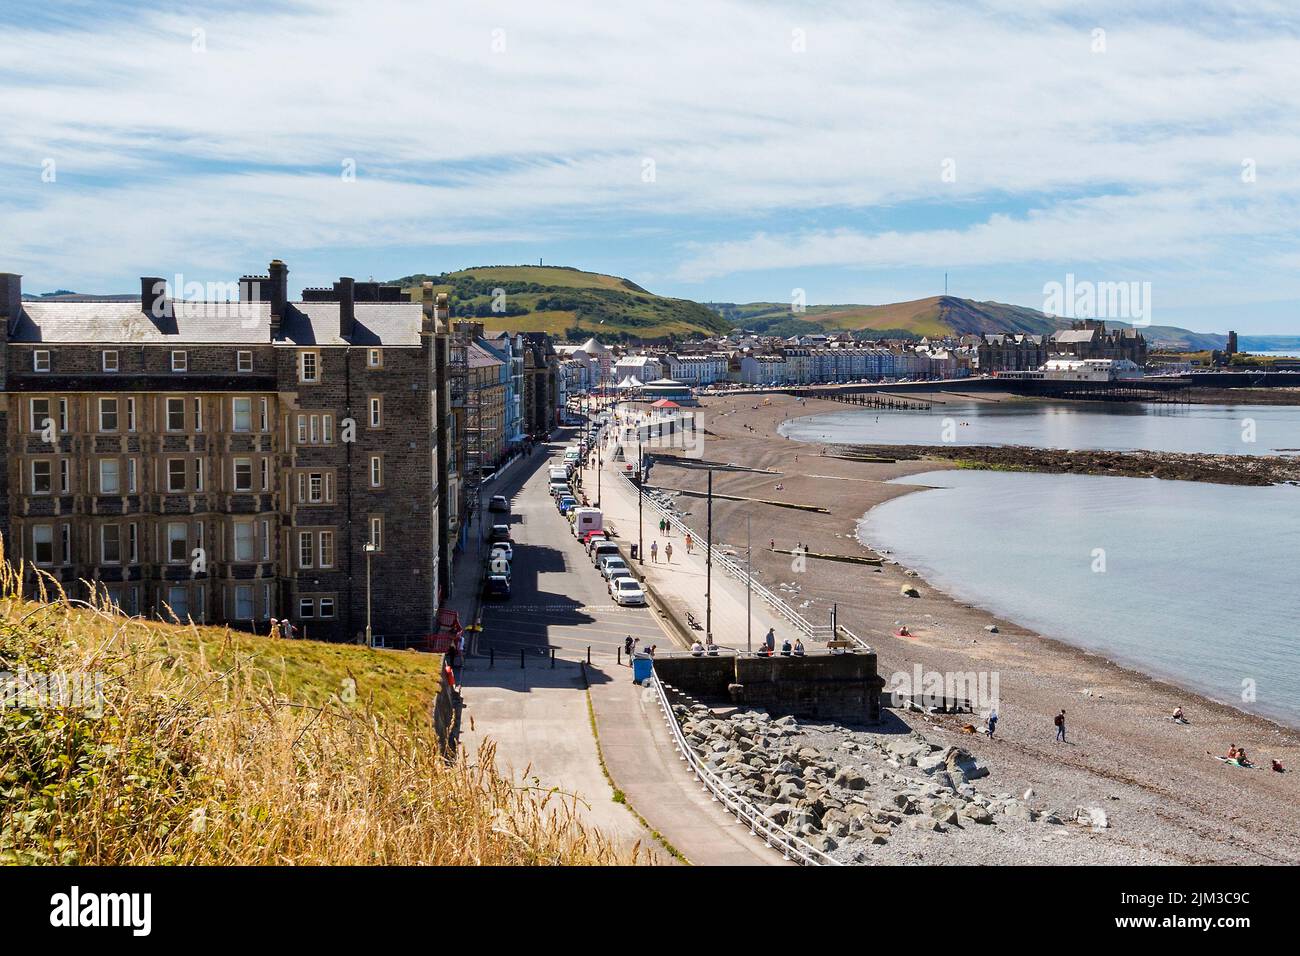 A view along the promenade and pebble beach at Aberystwyth, Wales. Stock Photo